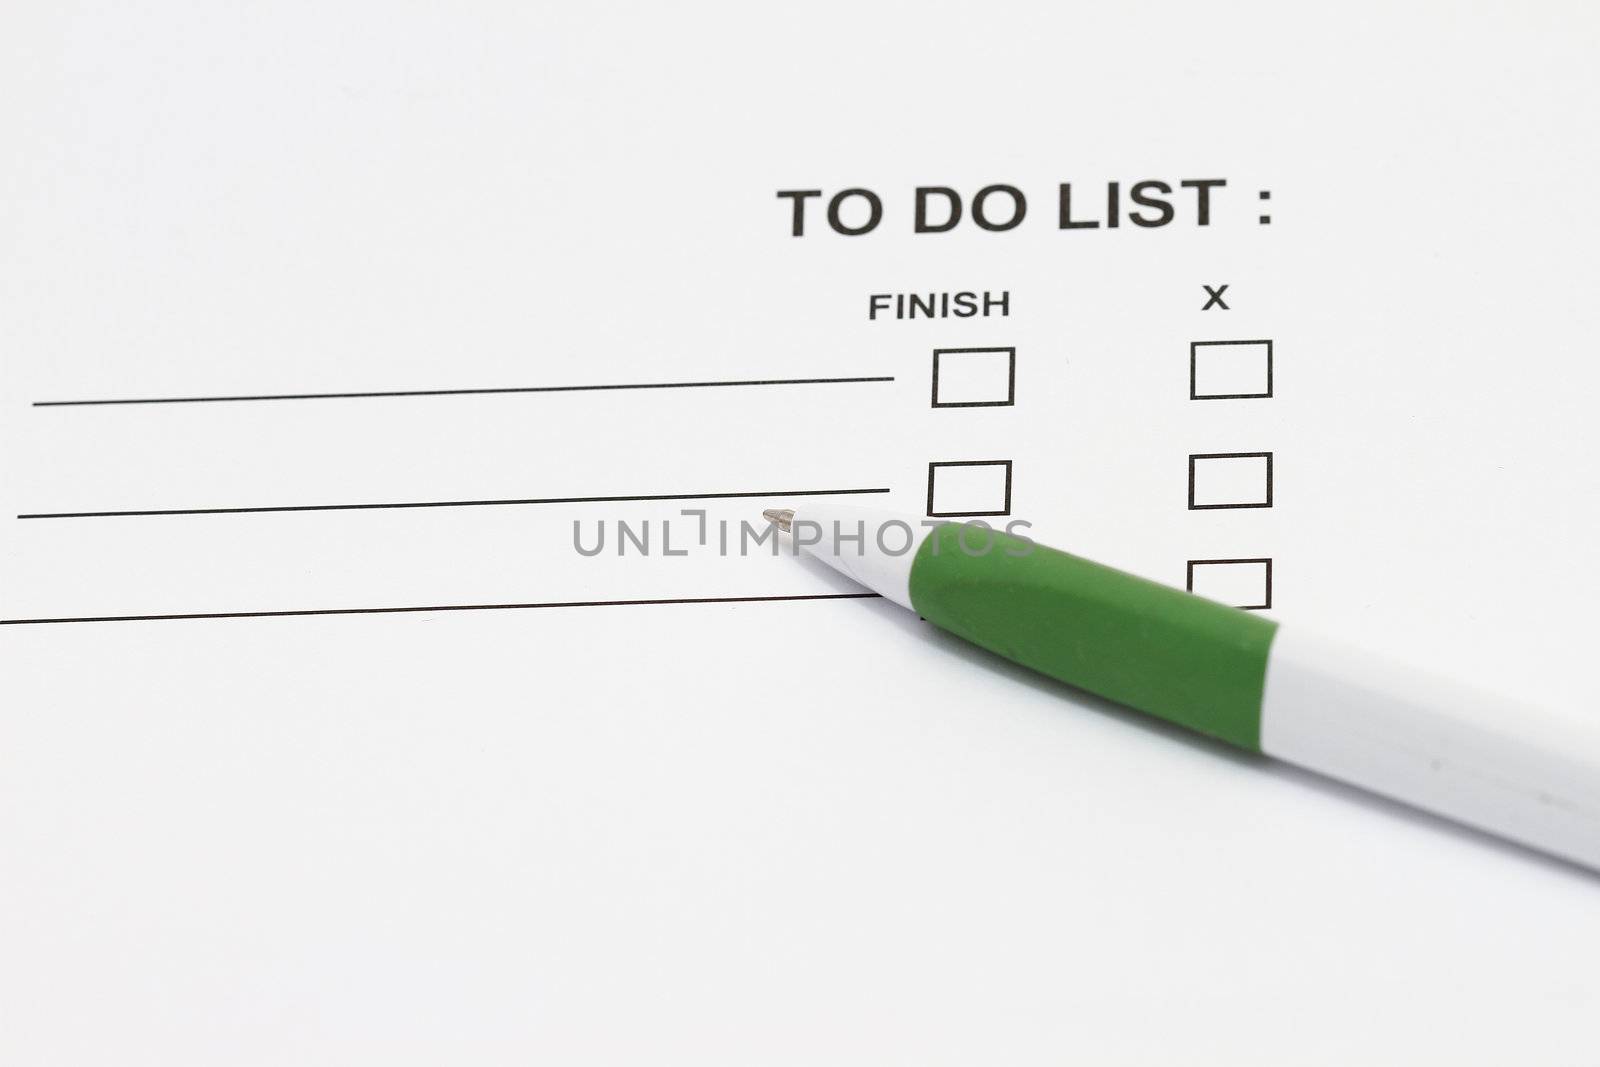 To do list - many uses for business concept.